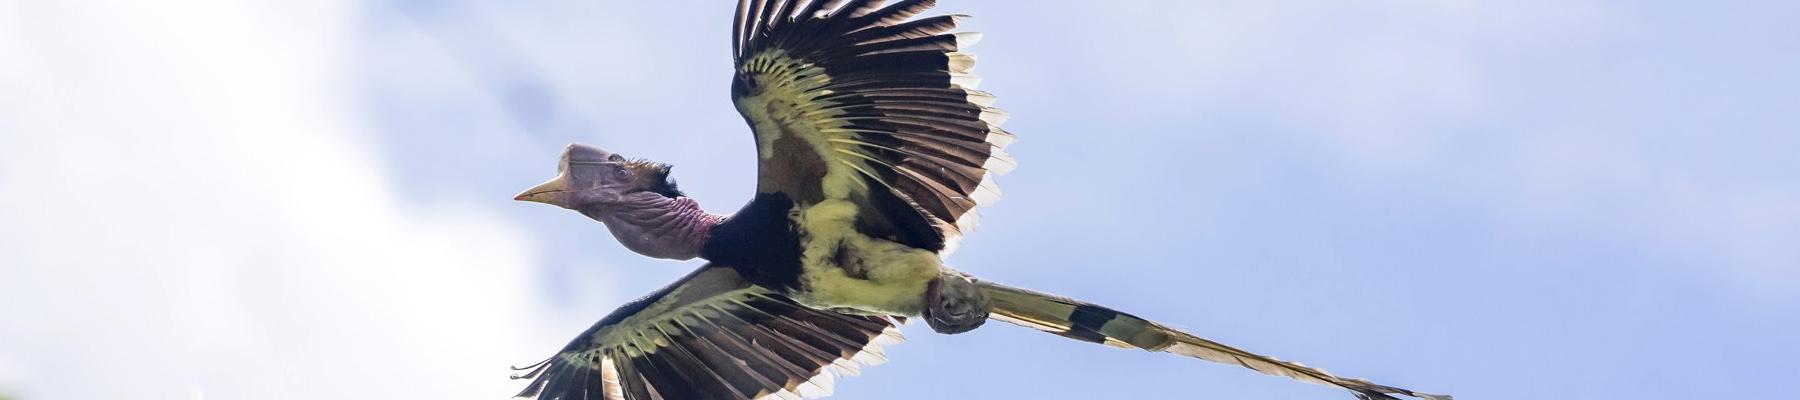 A Helmeted Hornbill, prized for their ivory casques, in flight © Muhammad Alzahri